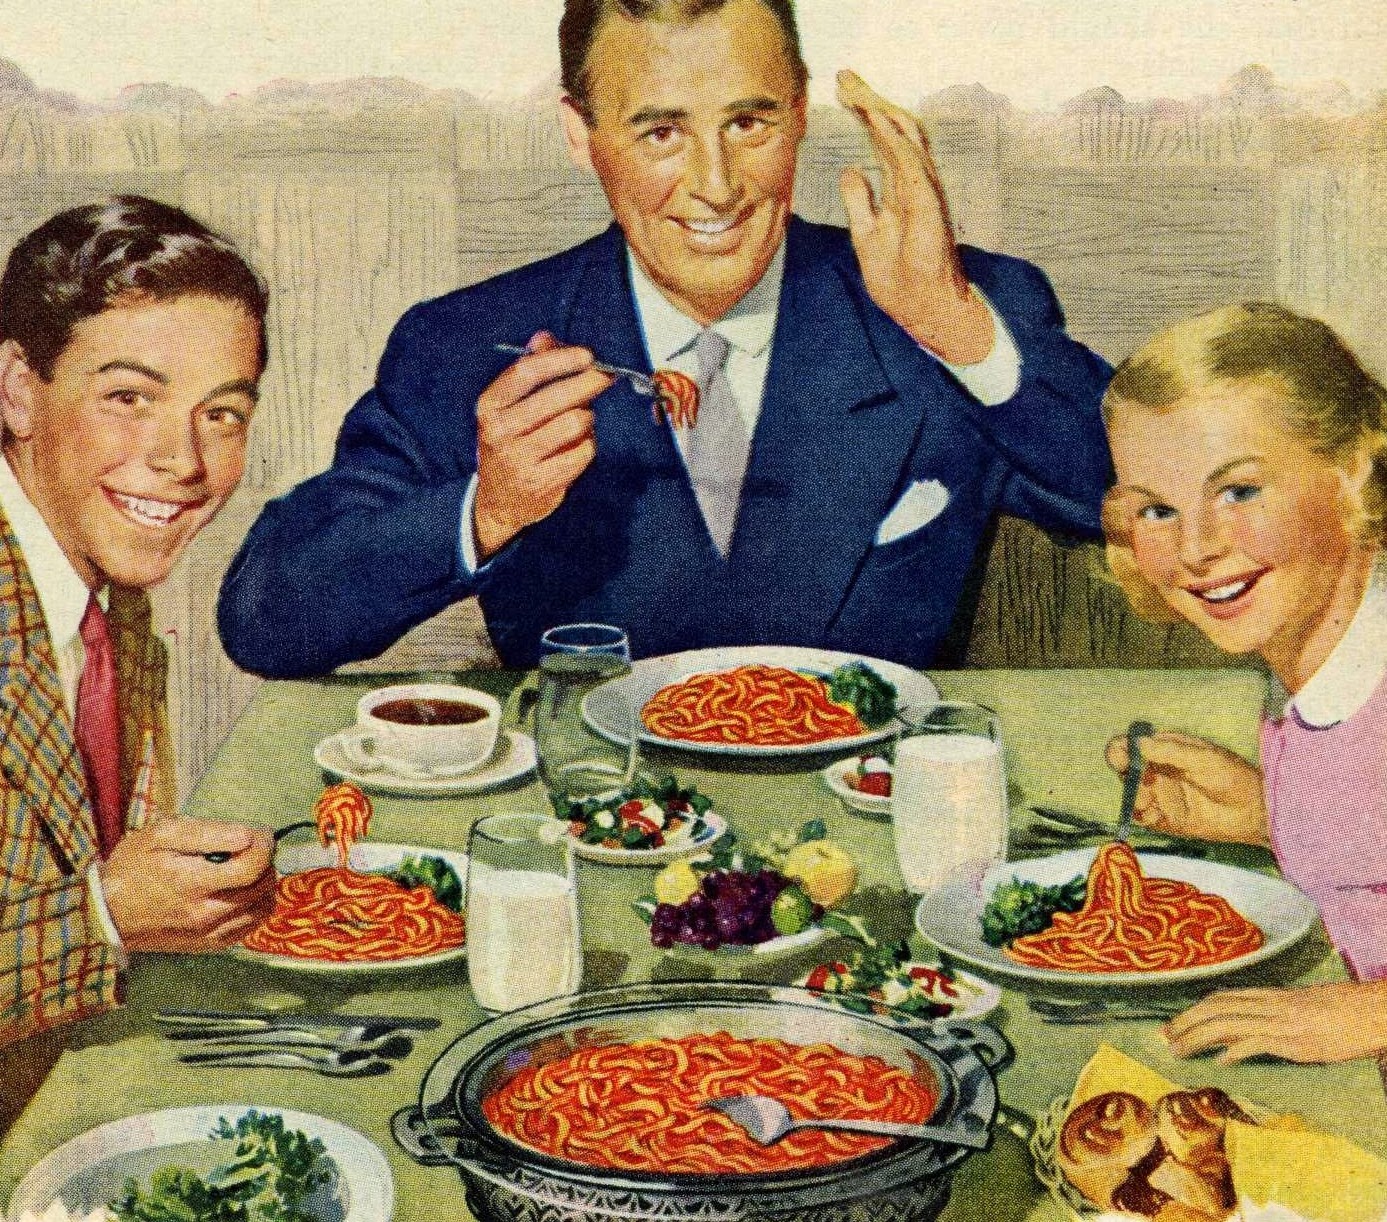 Study Proposes Outrageous Solution In Lieu of Family Dinners - Activist